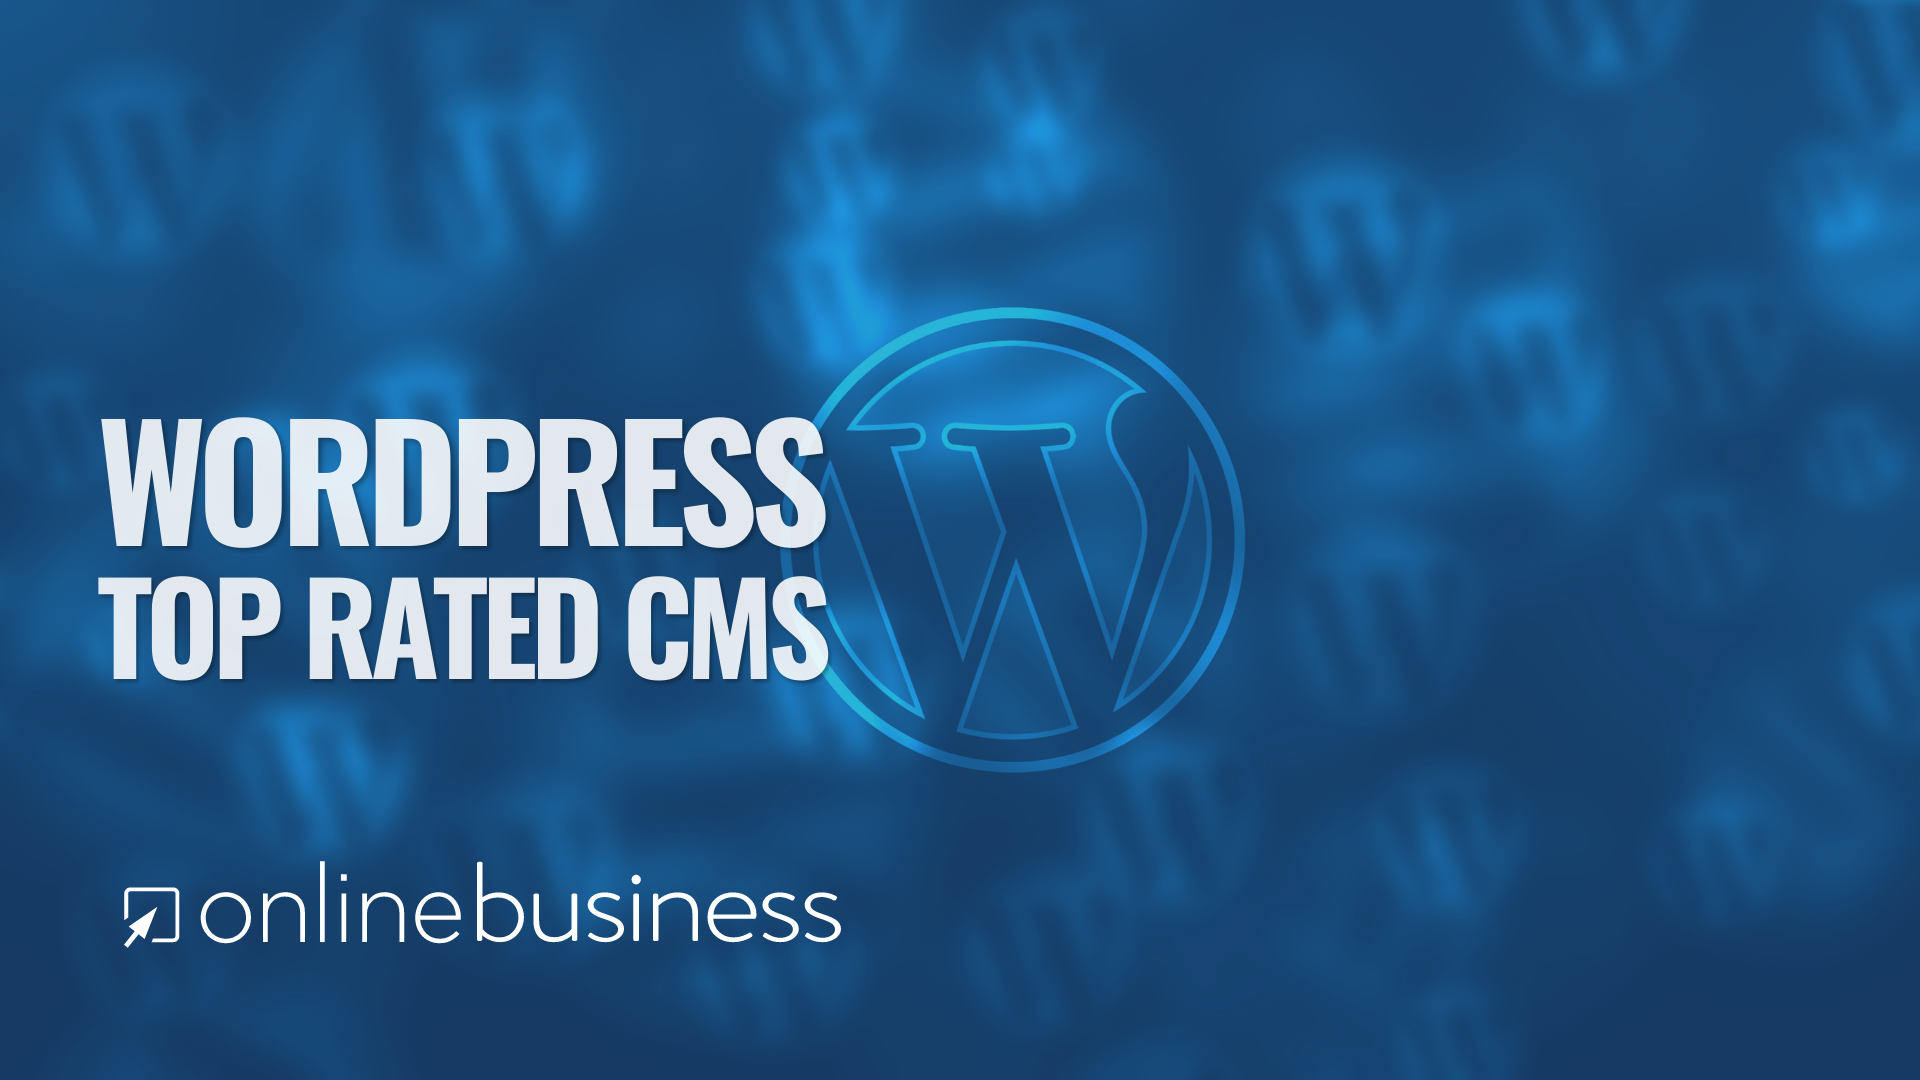 OnlineBusiness.com Recommends WordPress as the Preferred Choice Among Business Owners in Setting Up A Website